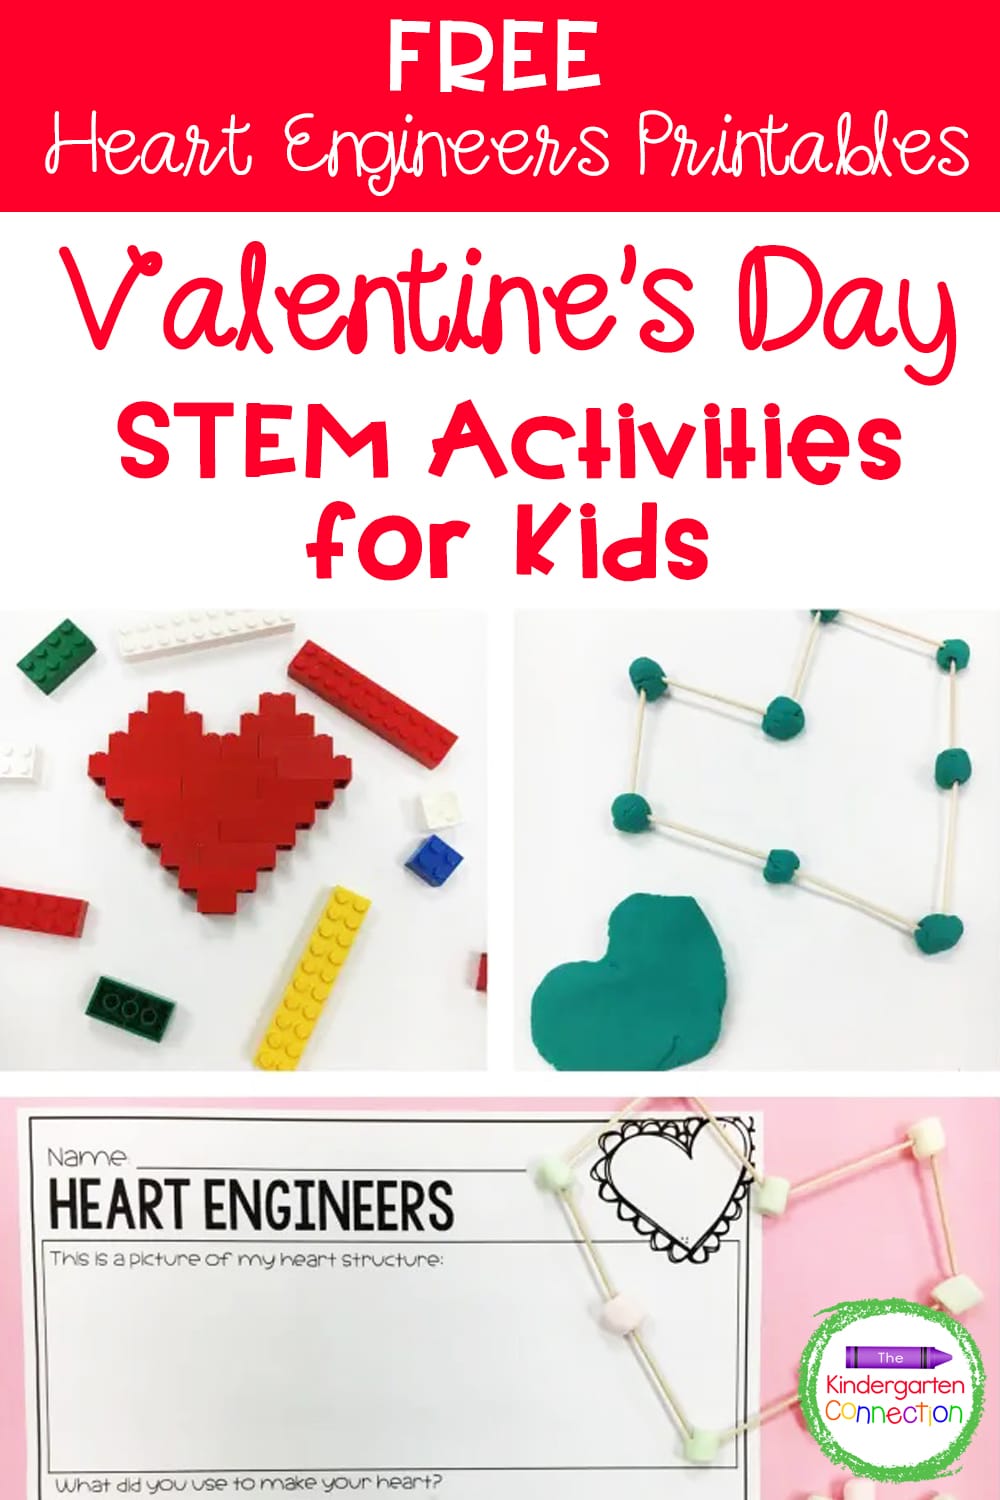 Your students are sure to “love” becoming engineers with these hands-on Valentine's Day STEM activities and free printables!